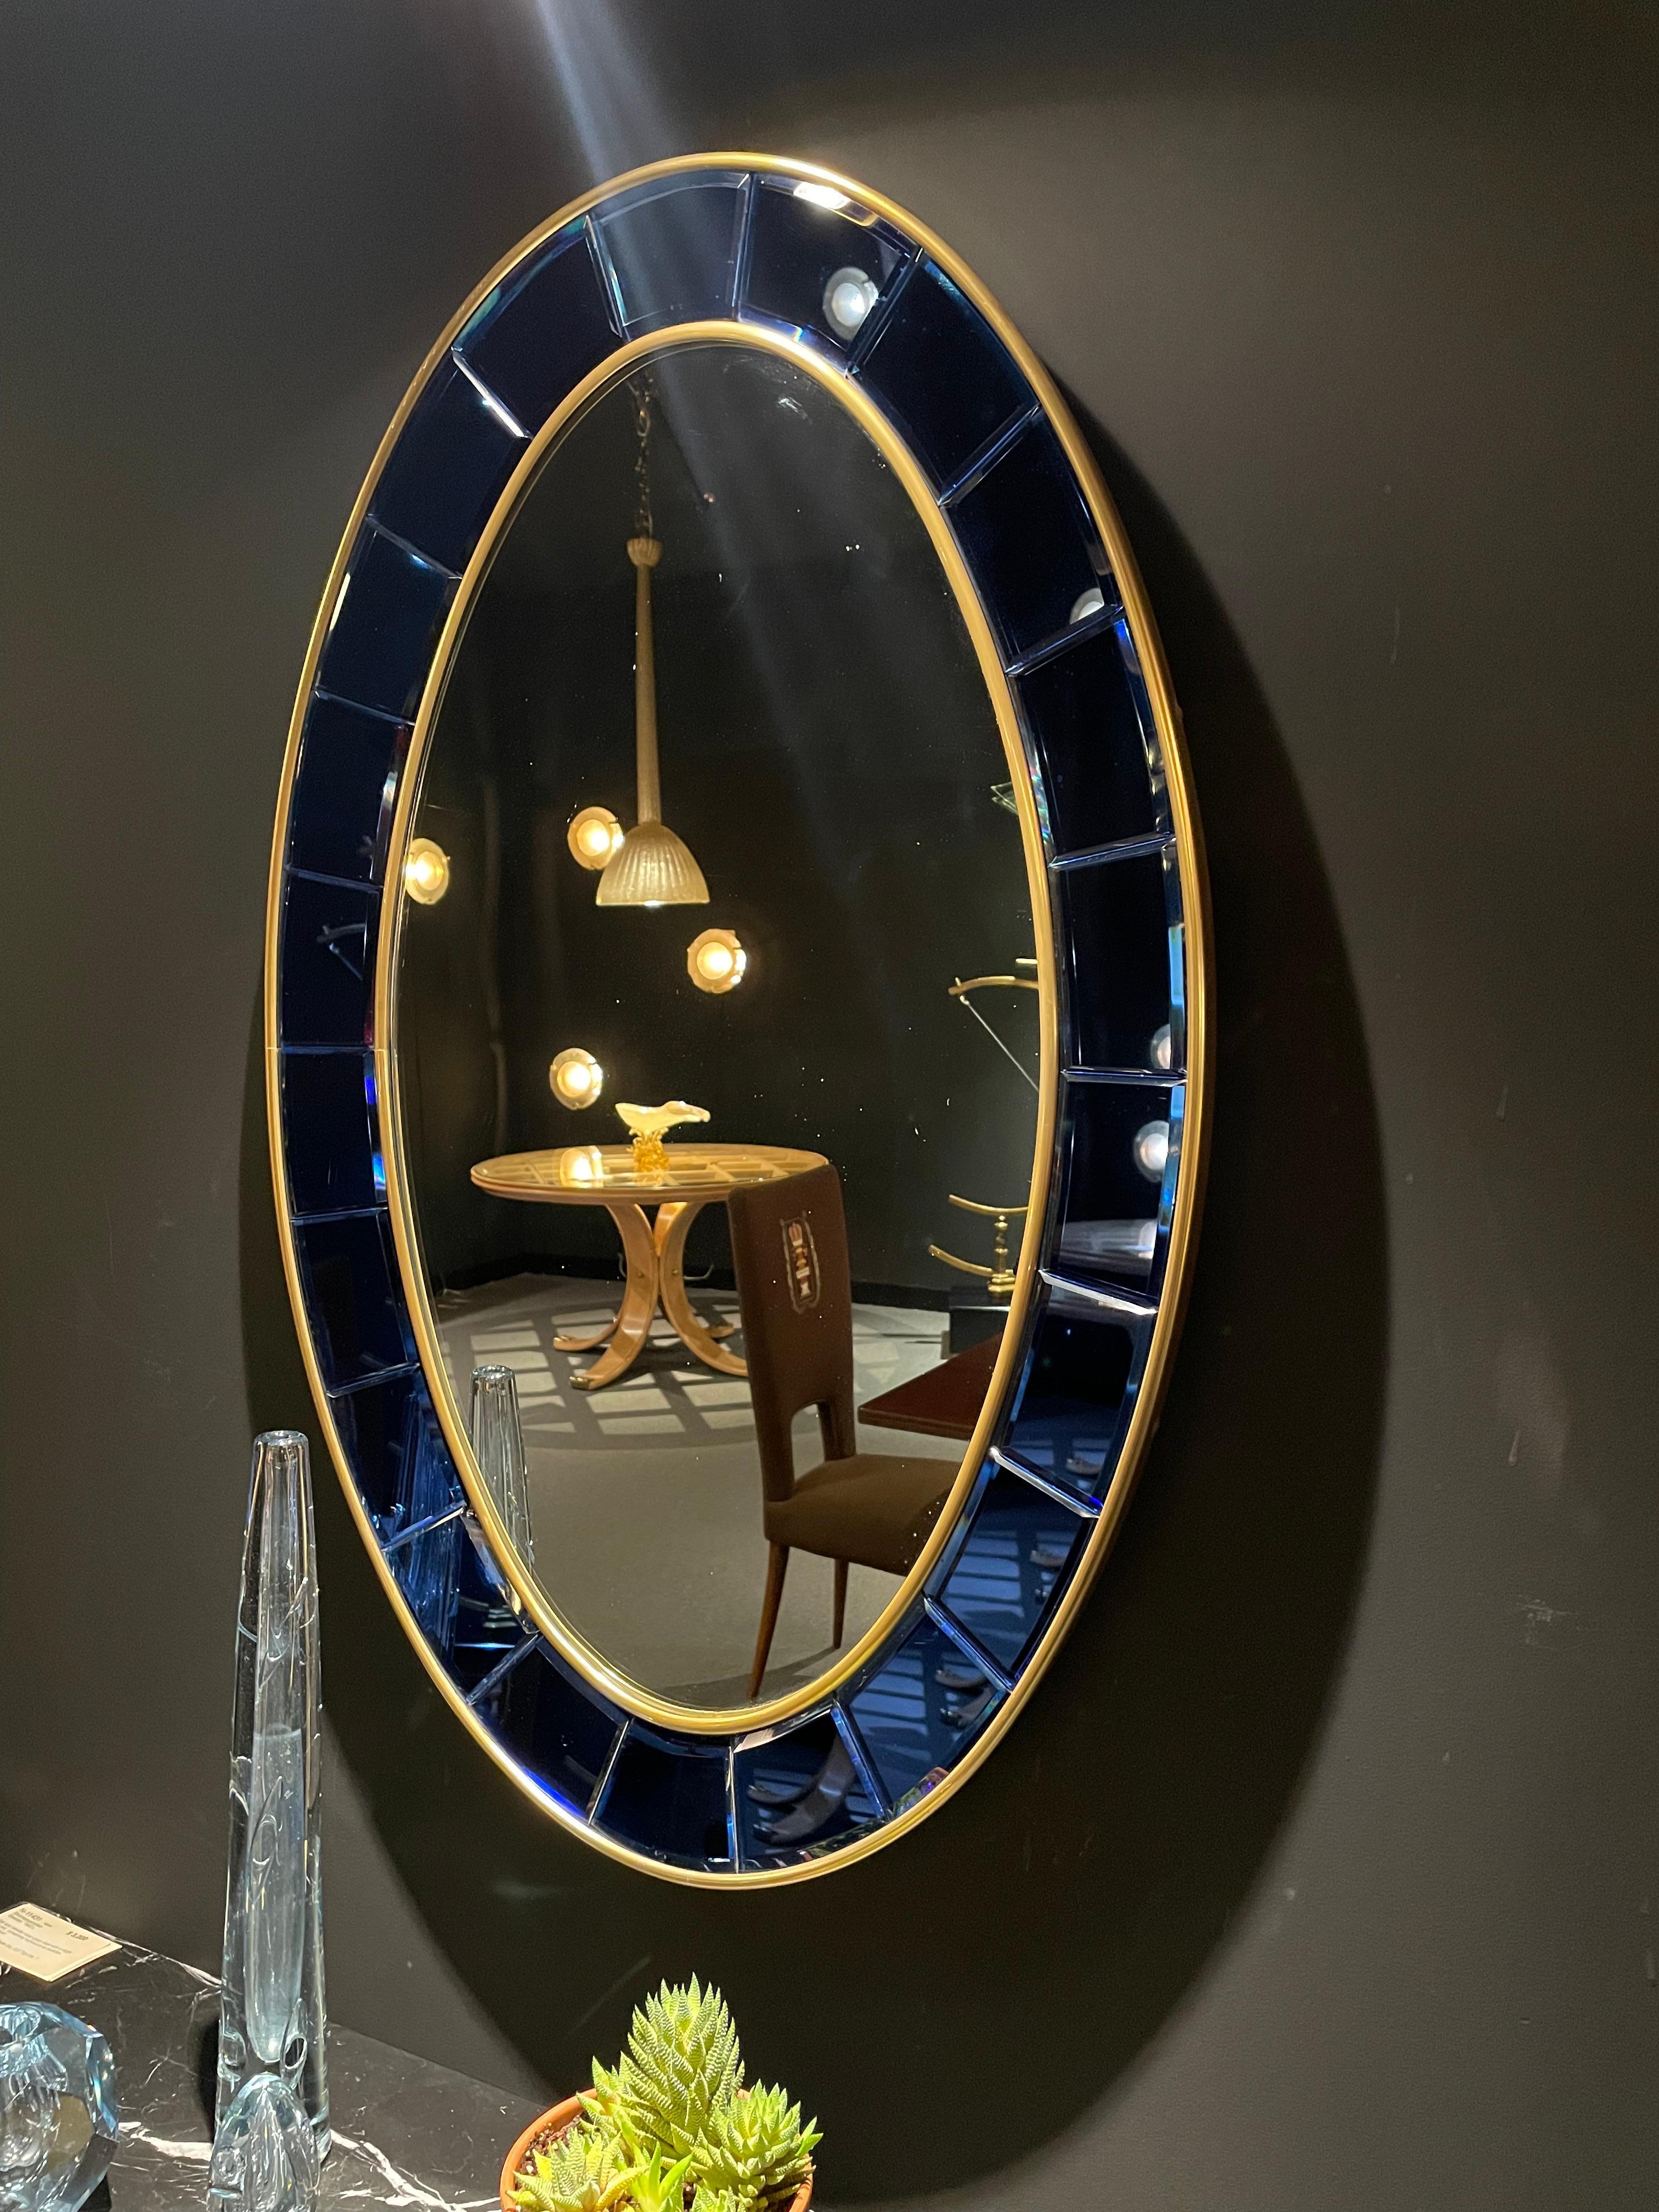 
Mirrored clear glass encompassed by a gallery of bright blue, beveled, and mirrored glass with gilded bronze trim.